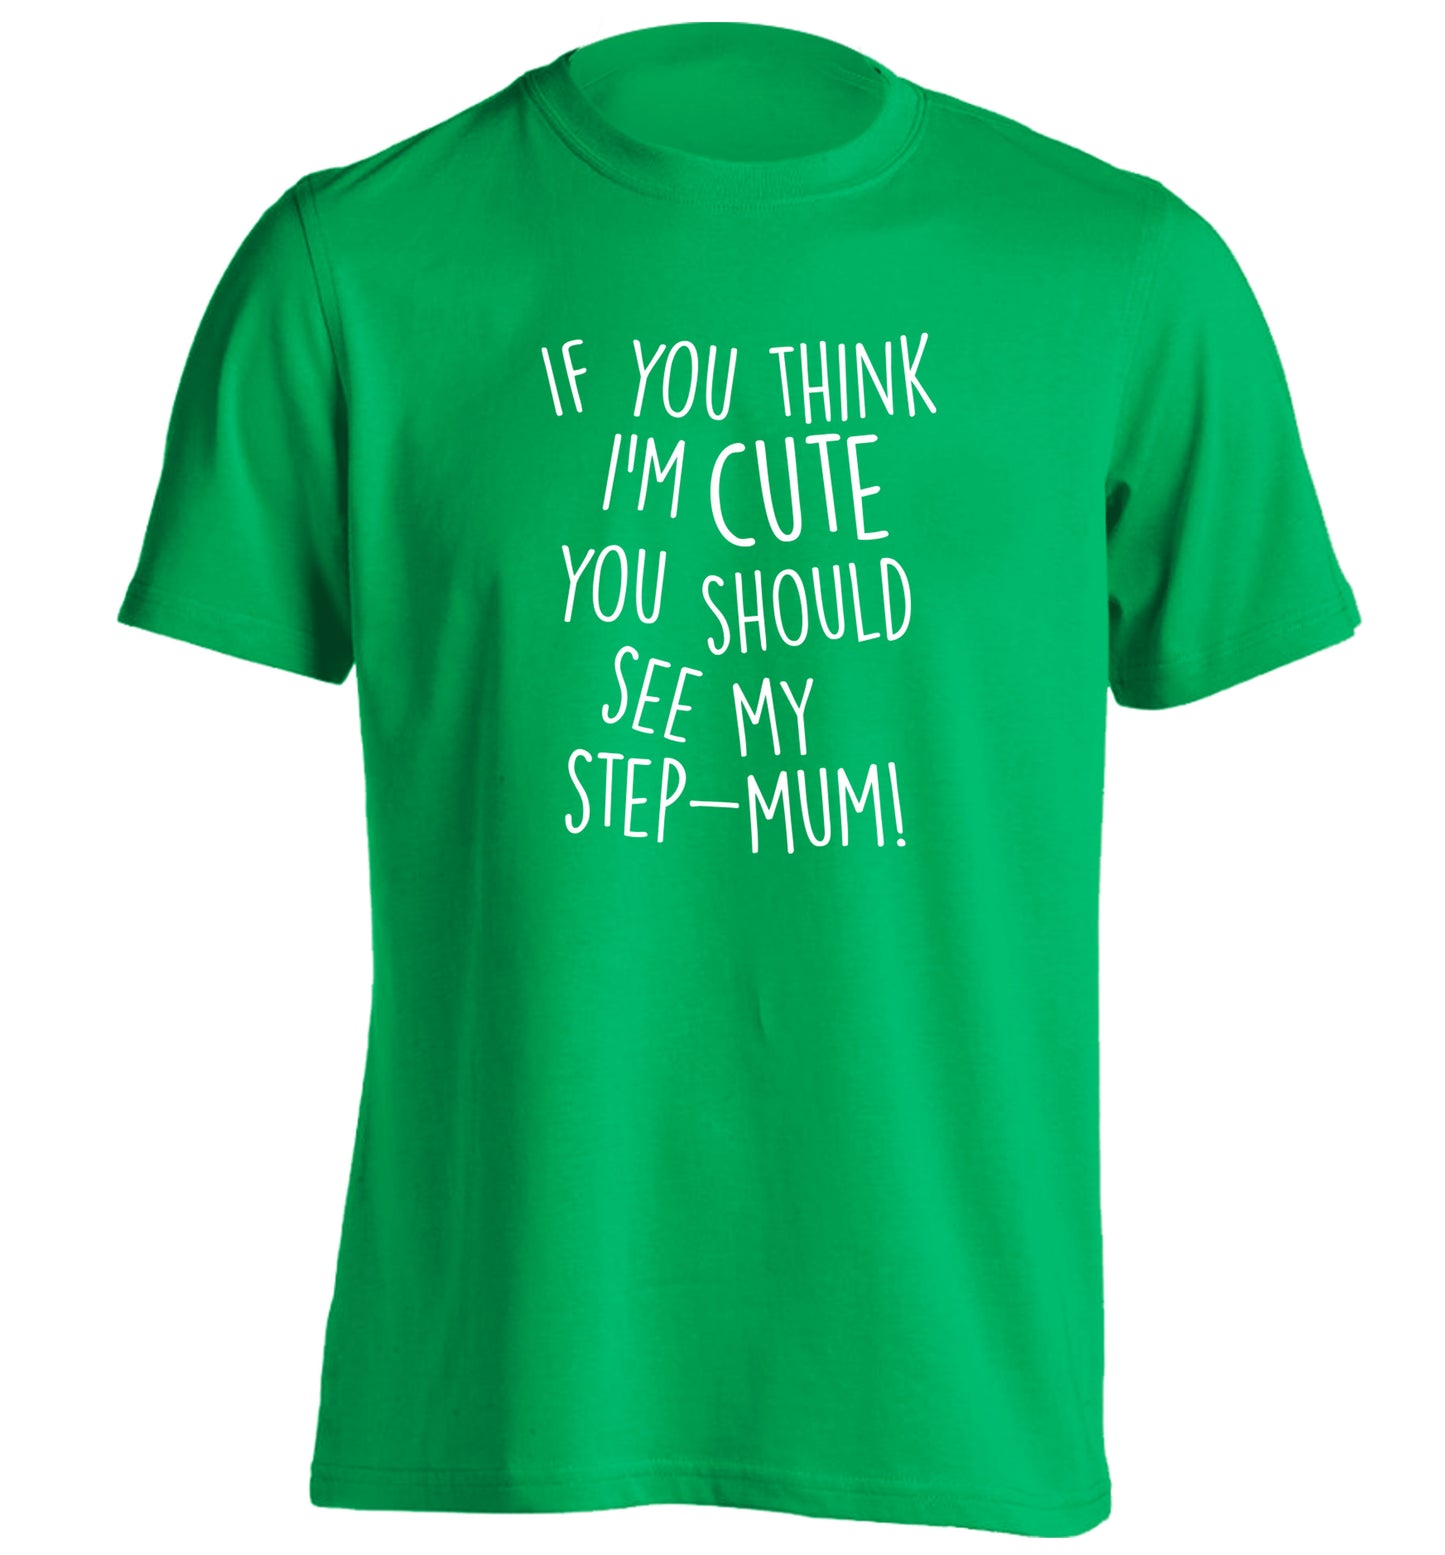 If you think I'm cute you should see my step-mum adults unisex green Tshirt 2XL